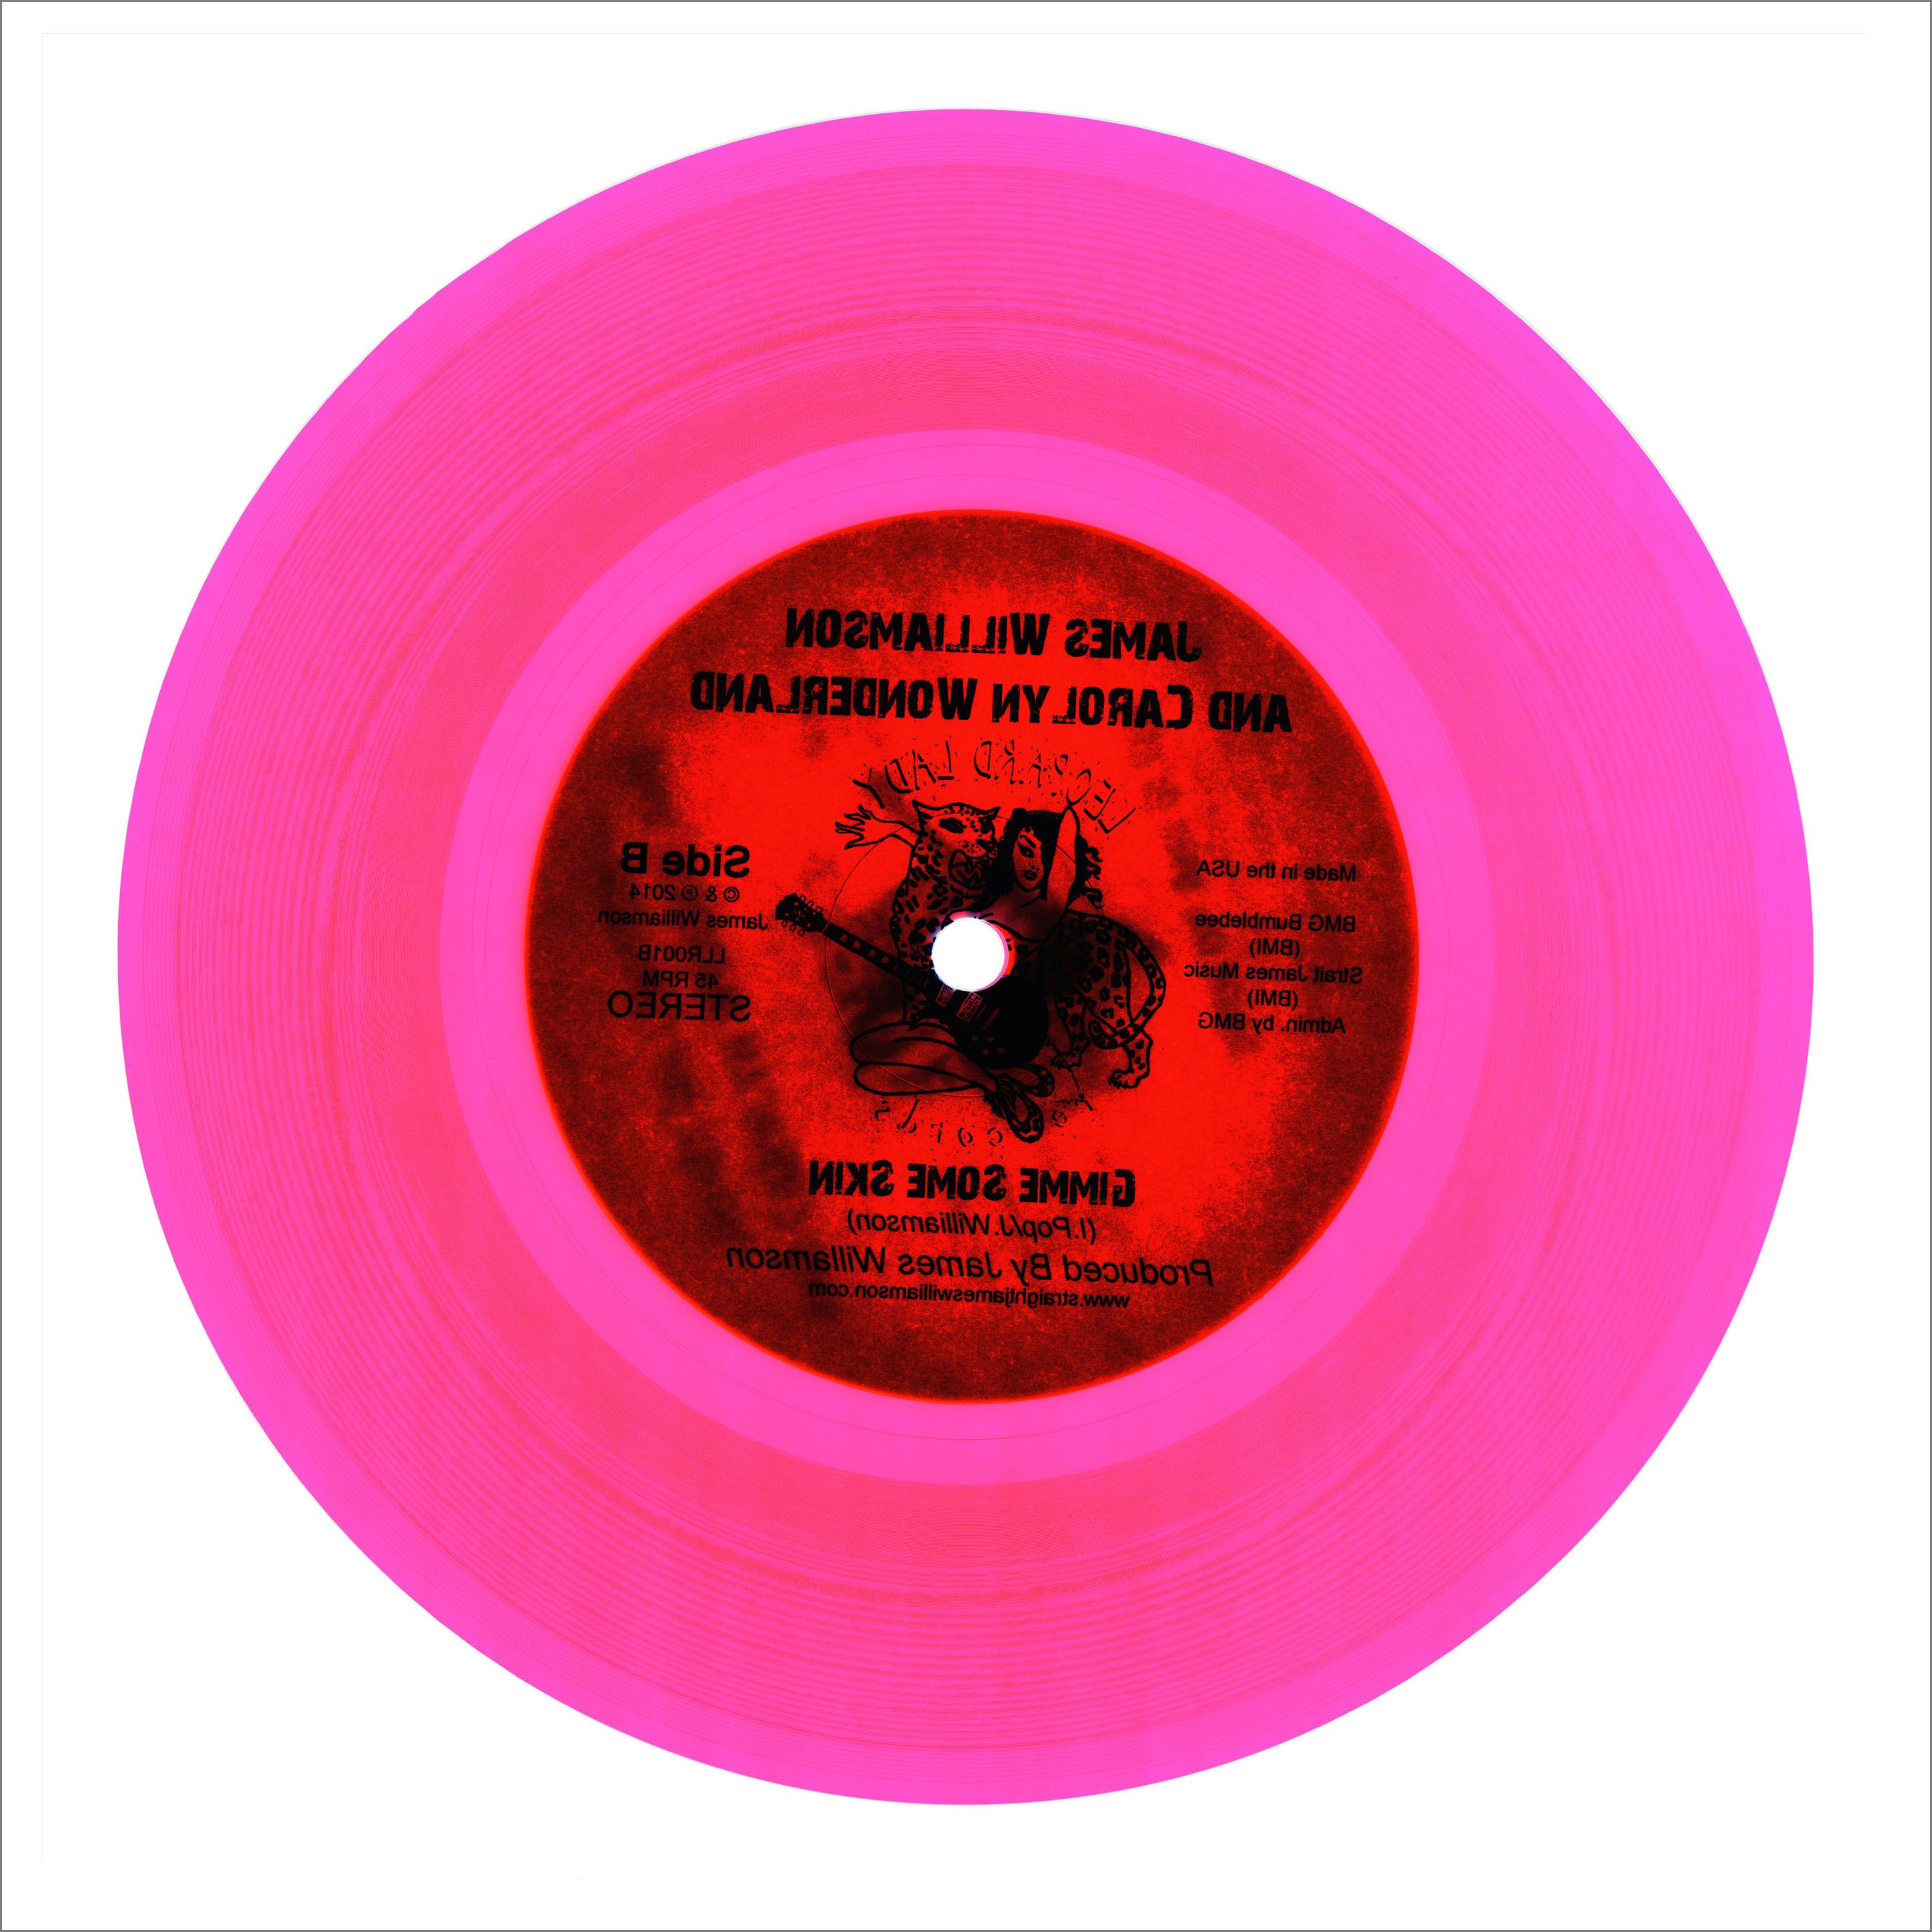 Print Heidler & Heeps - Collection B Side Vinyl, Made in the USA (Pink) - Photogrpahy couleur Pop Art